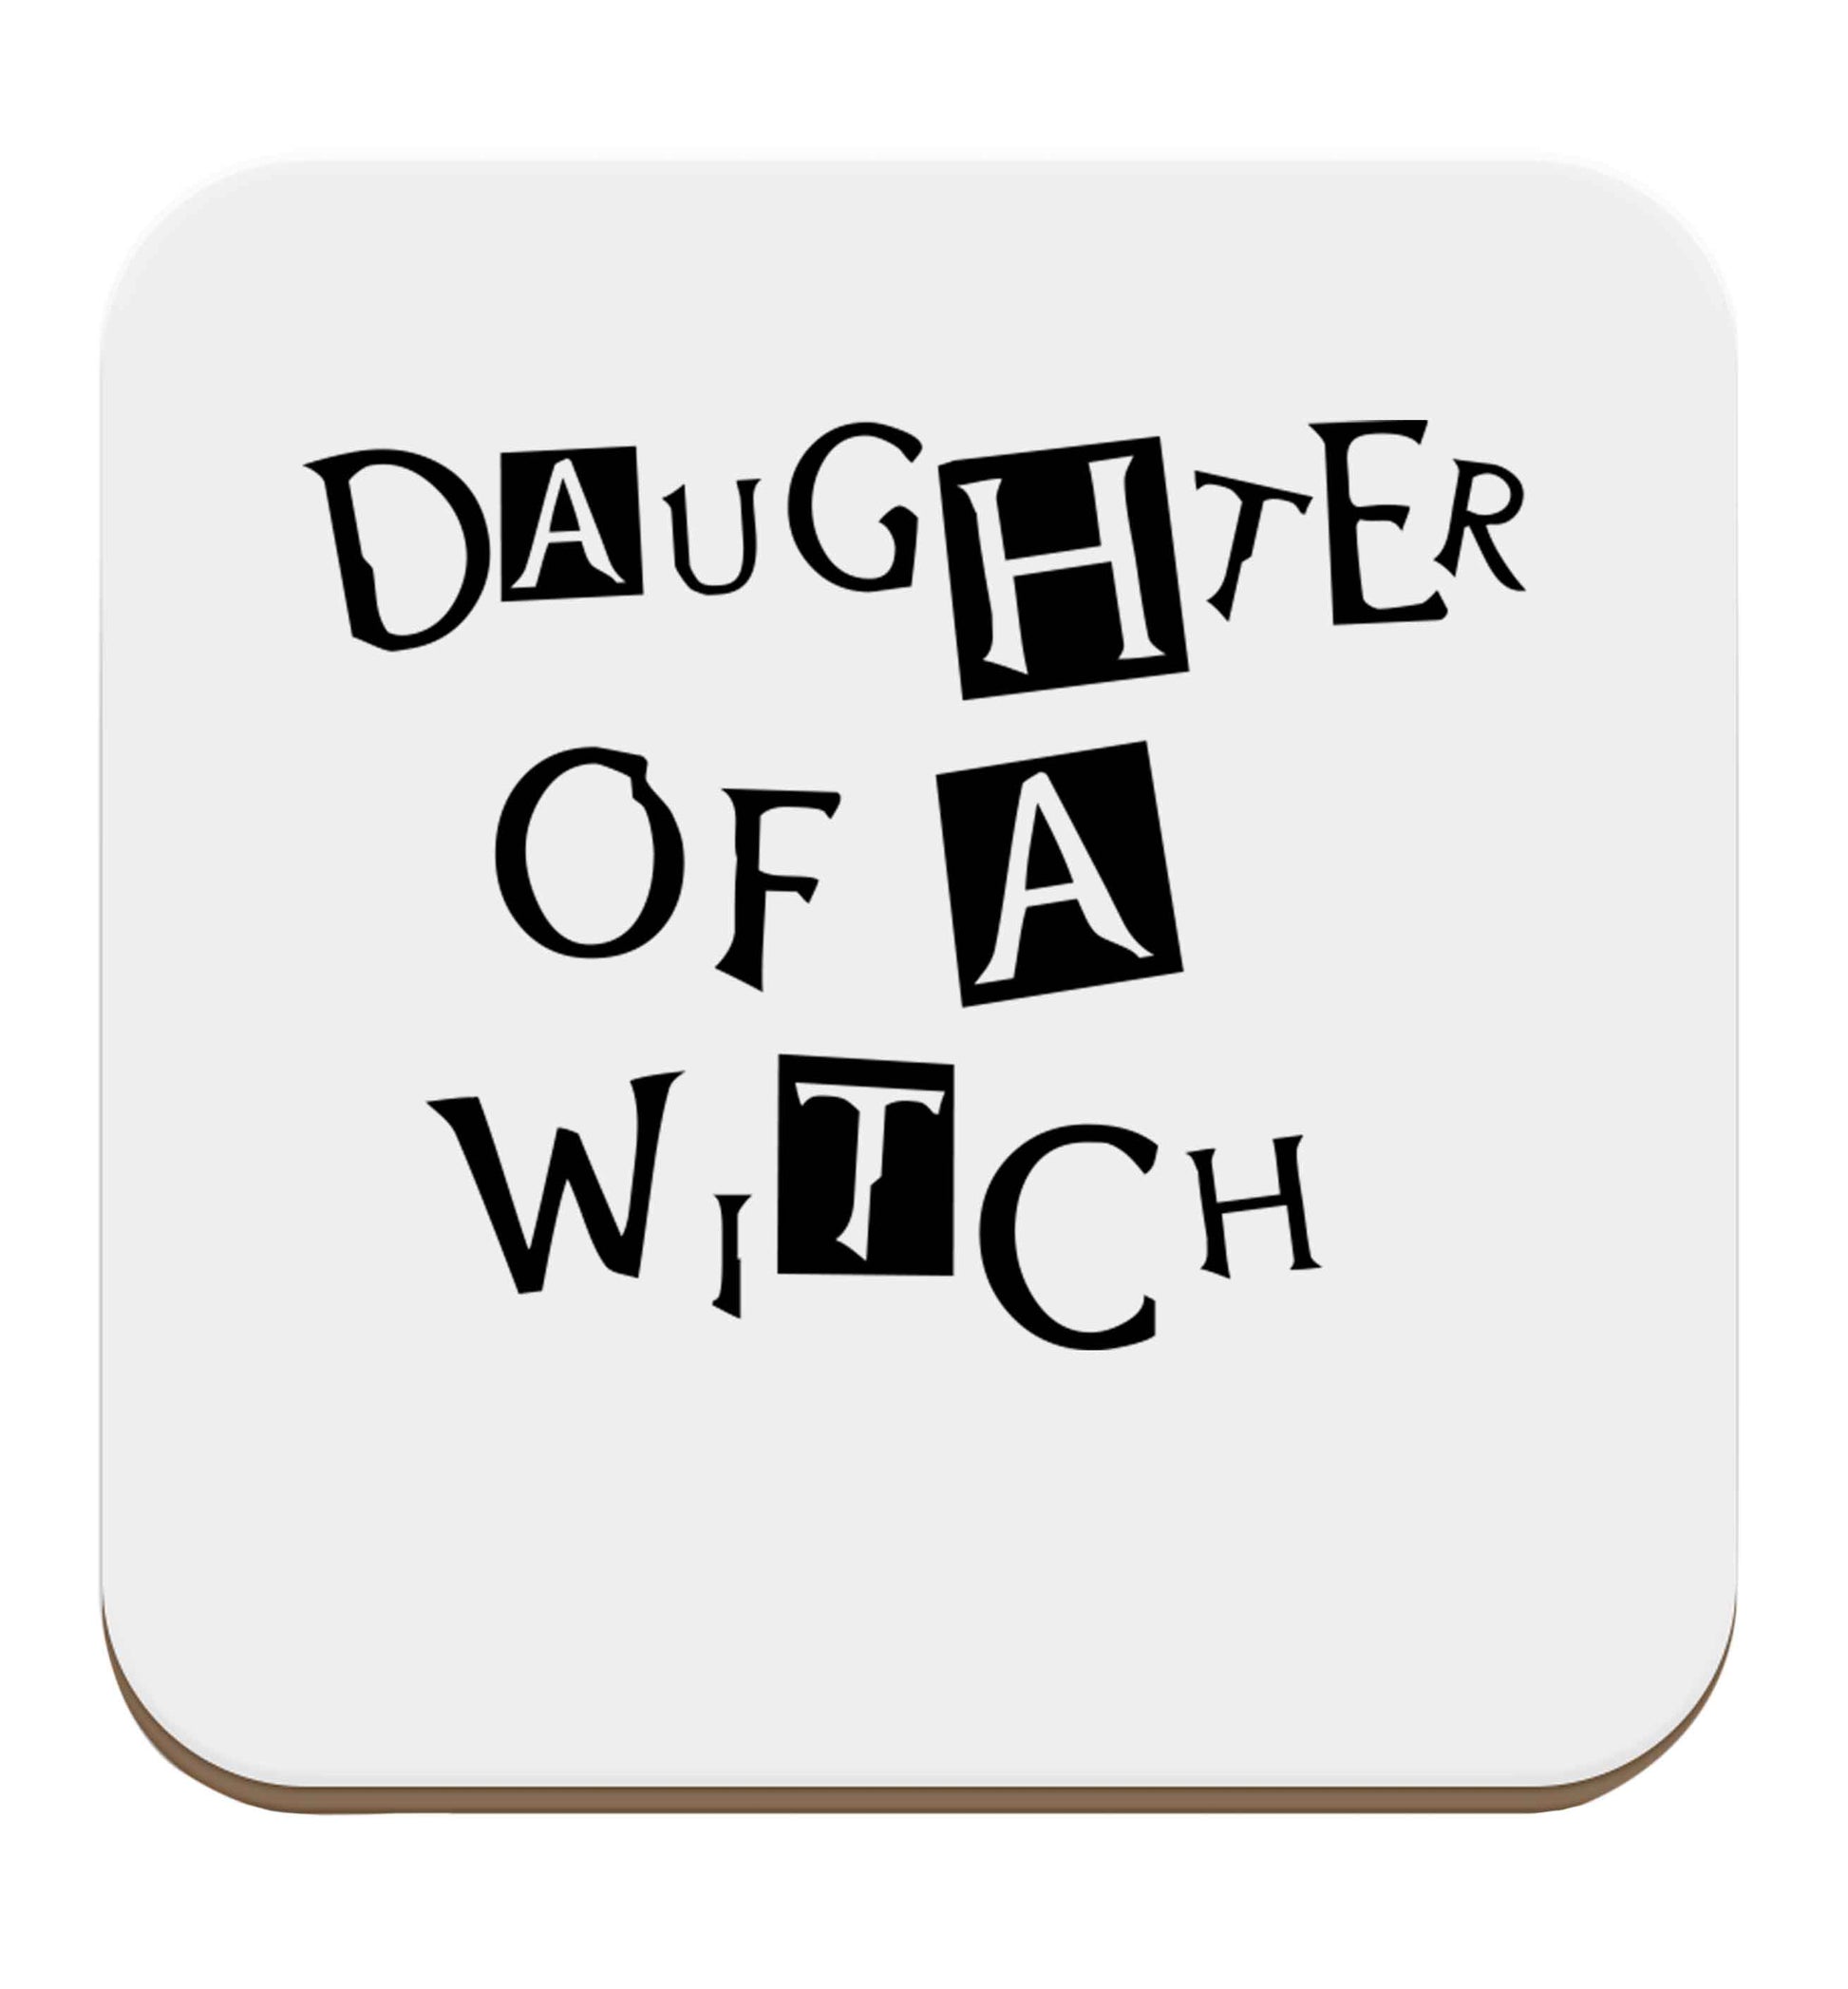 Daughter of a witch set of four coasters